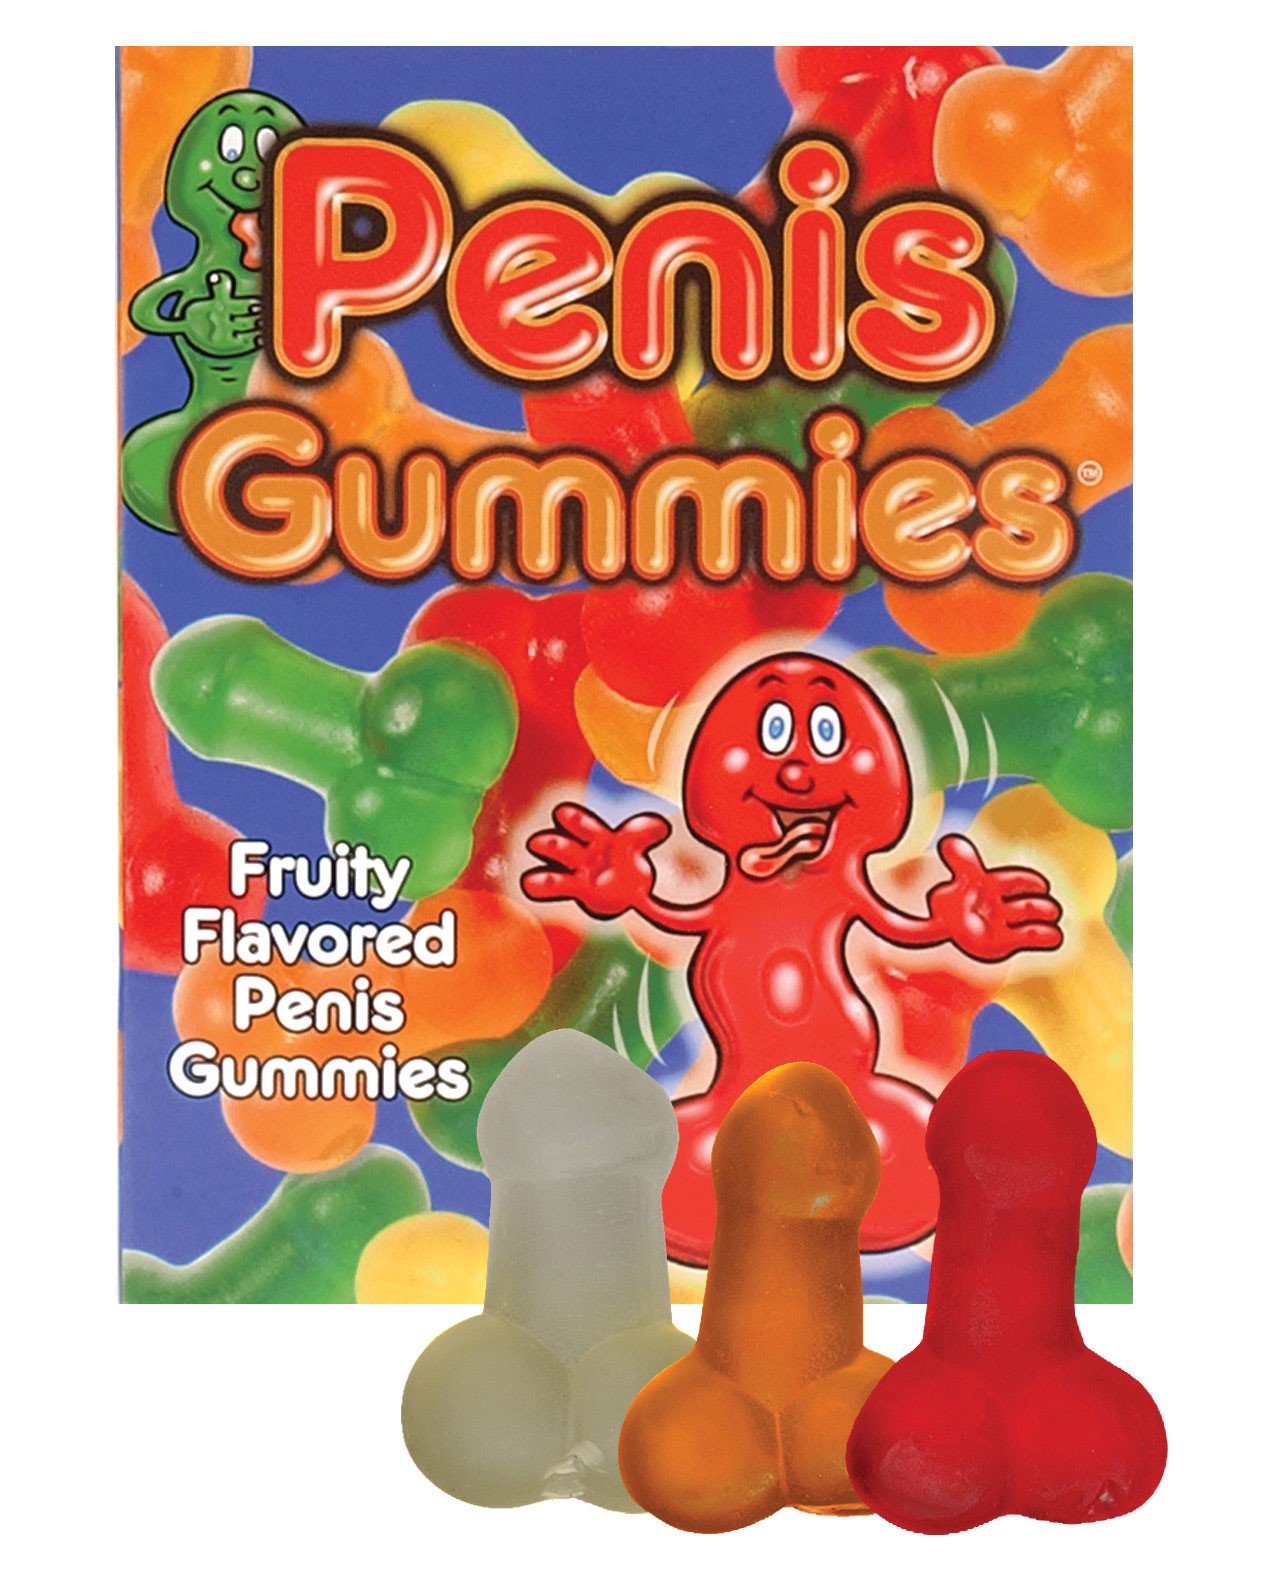 Chew on three different flavors of soft, gummy penis shaped candies. 